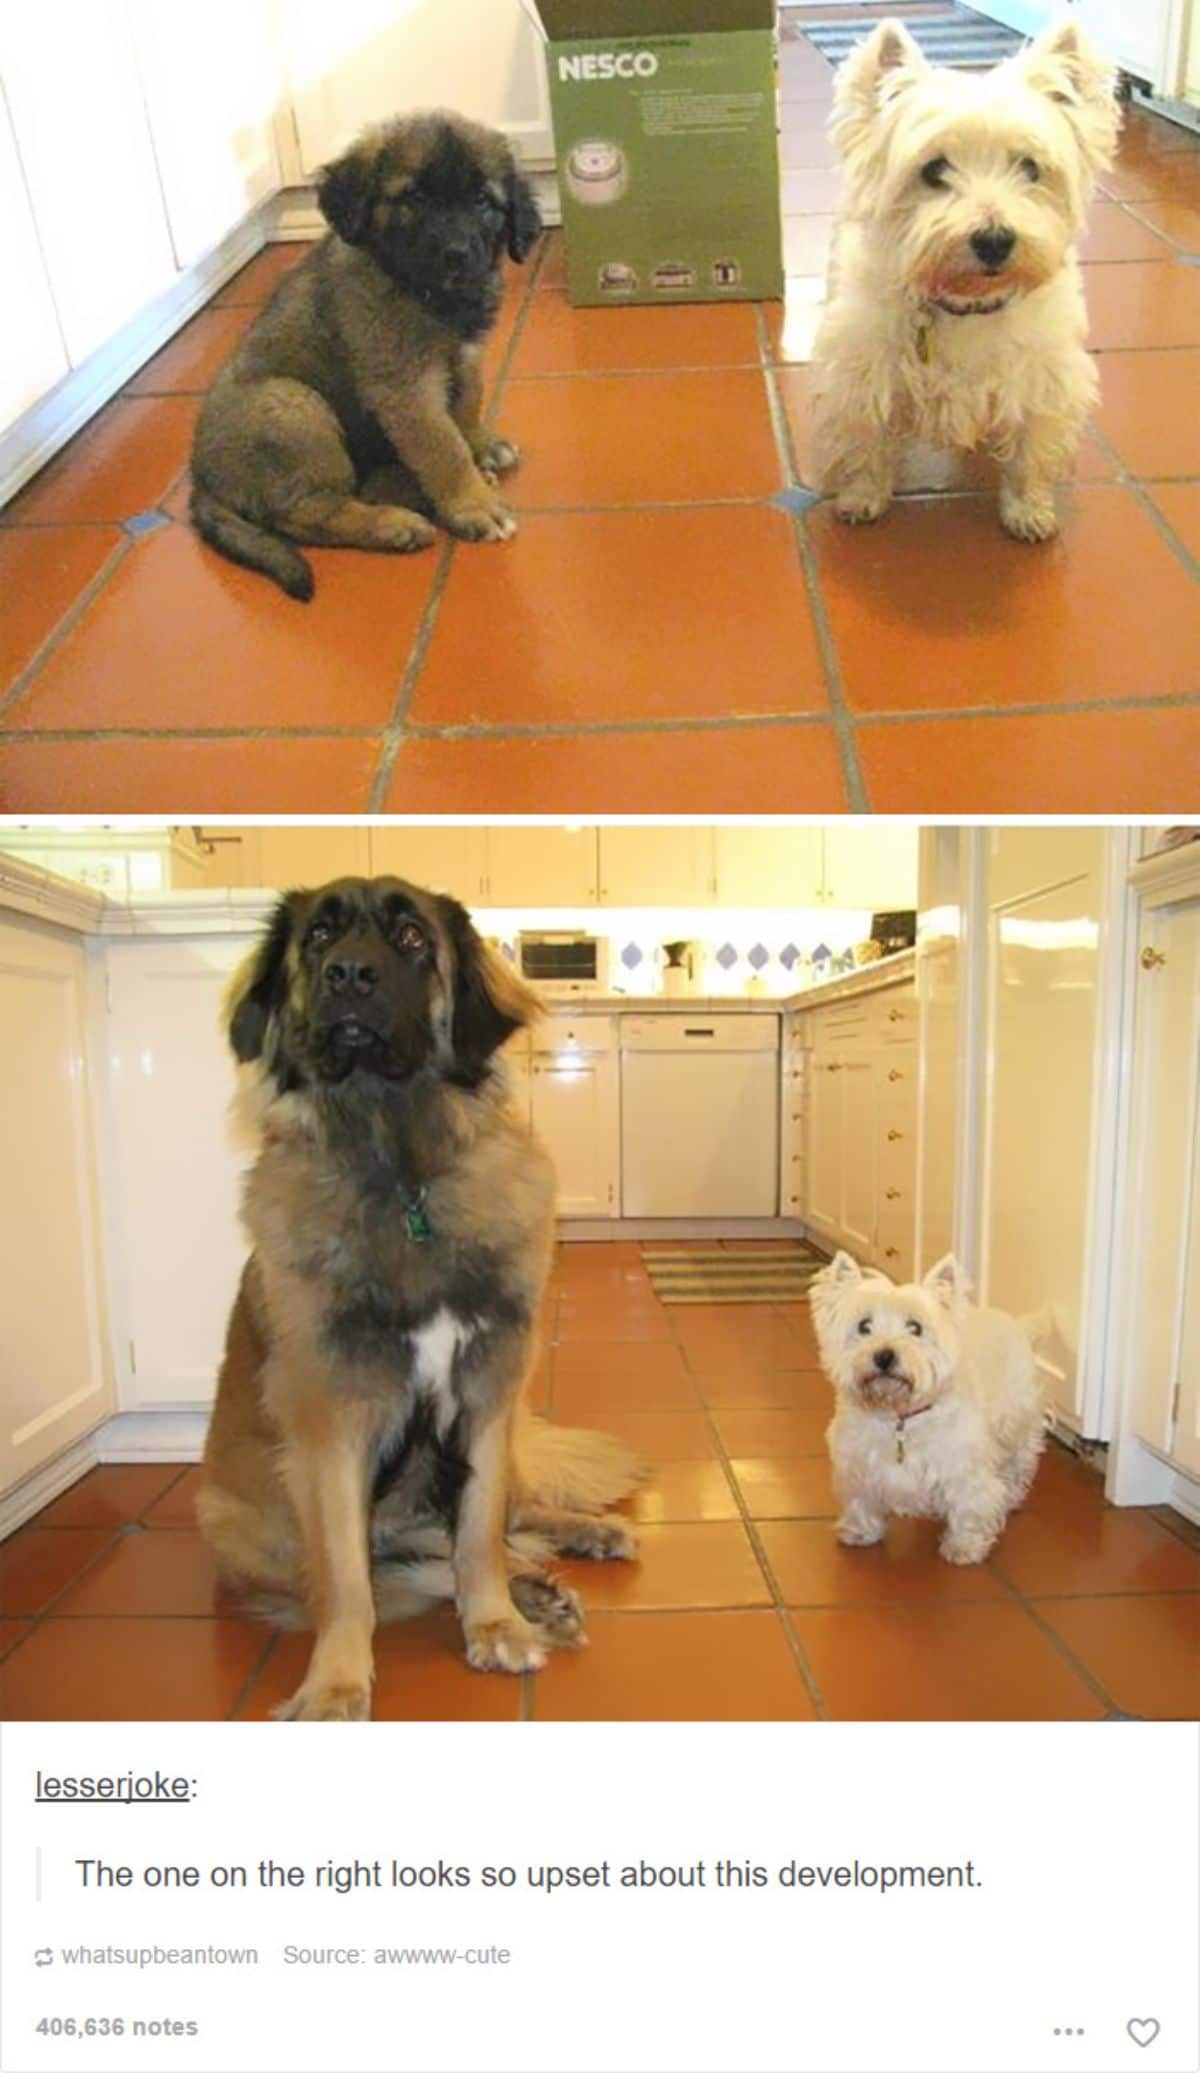 tumblr post of 2 photos of a fluffy brown and black dog grown up next to a small fluffy white dog and the caption says the white dog doesn't look happy with the development